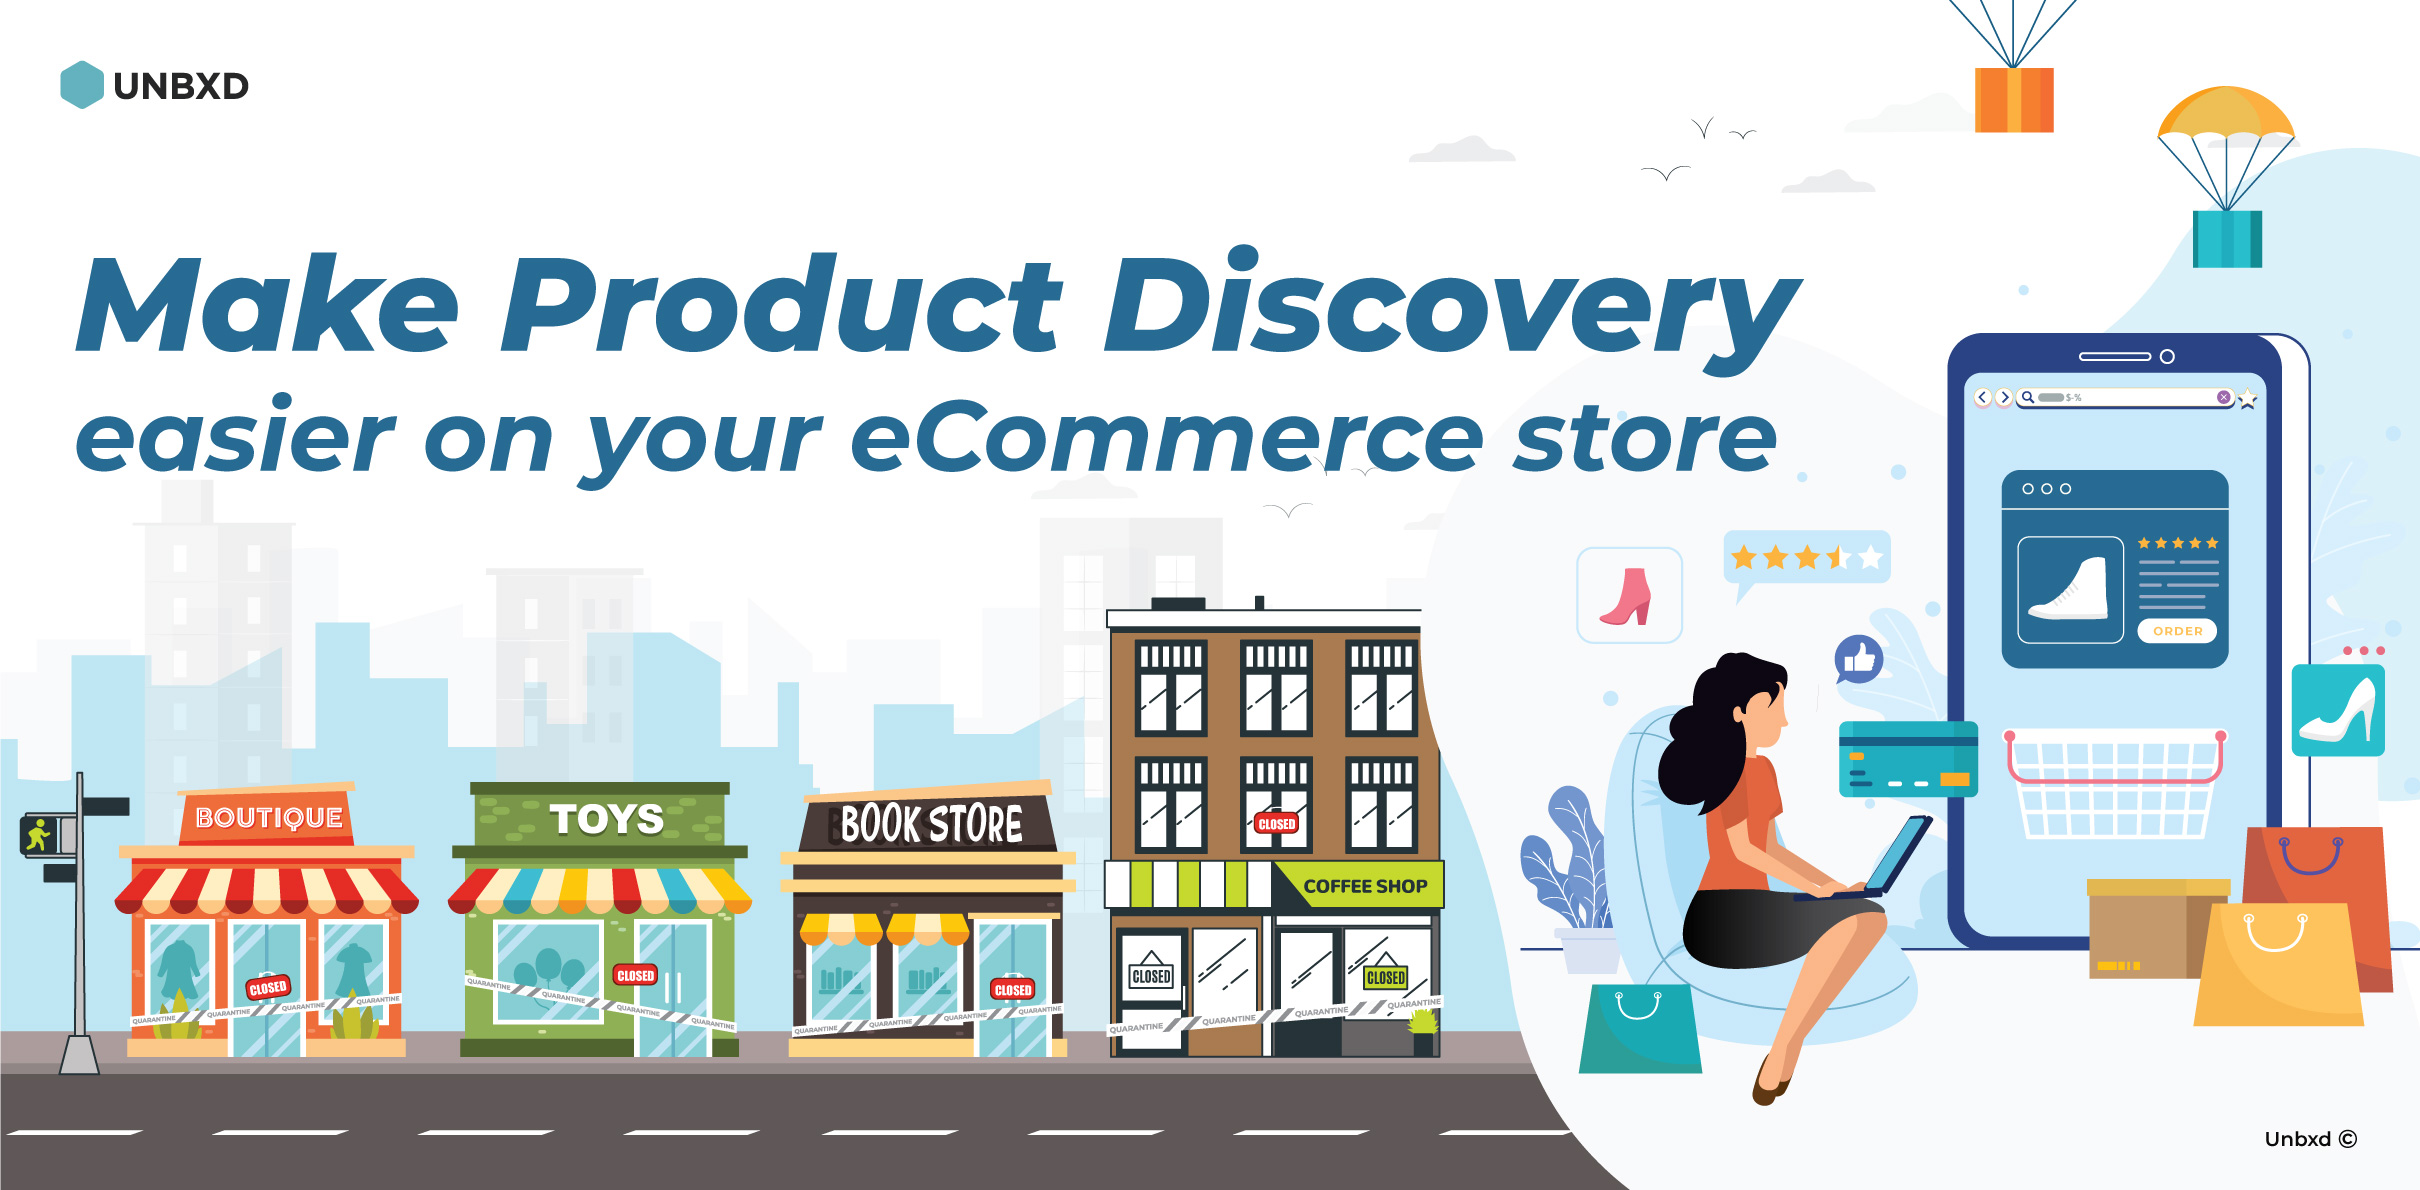 Why now is a good time to fix product discovery for your eCommerce store?